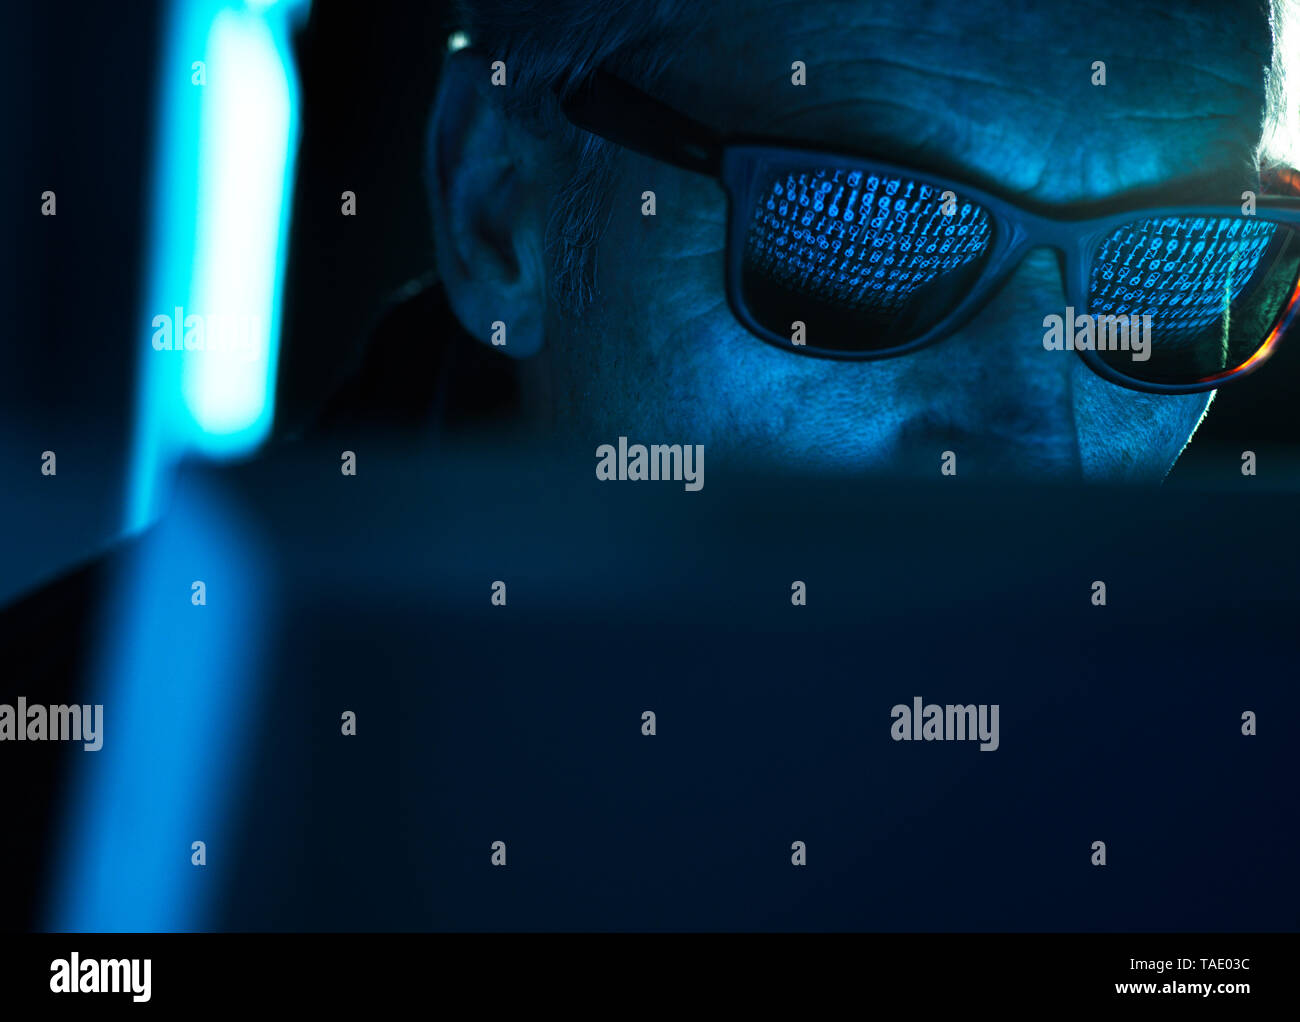 Cyber Crime, reflection in spectacles of virus hacking a computer, close up of face Stock Photo